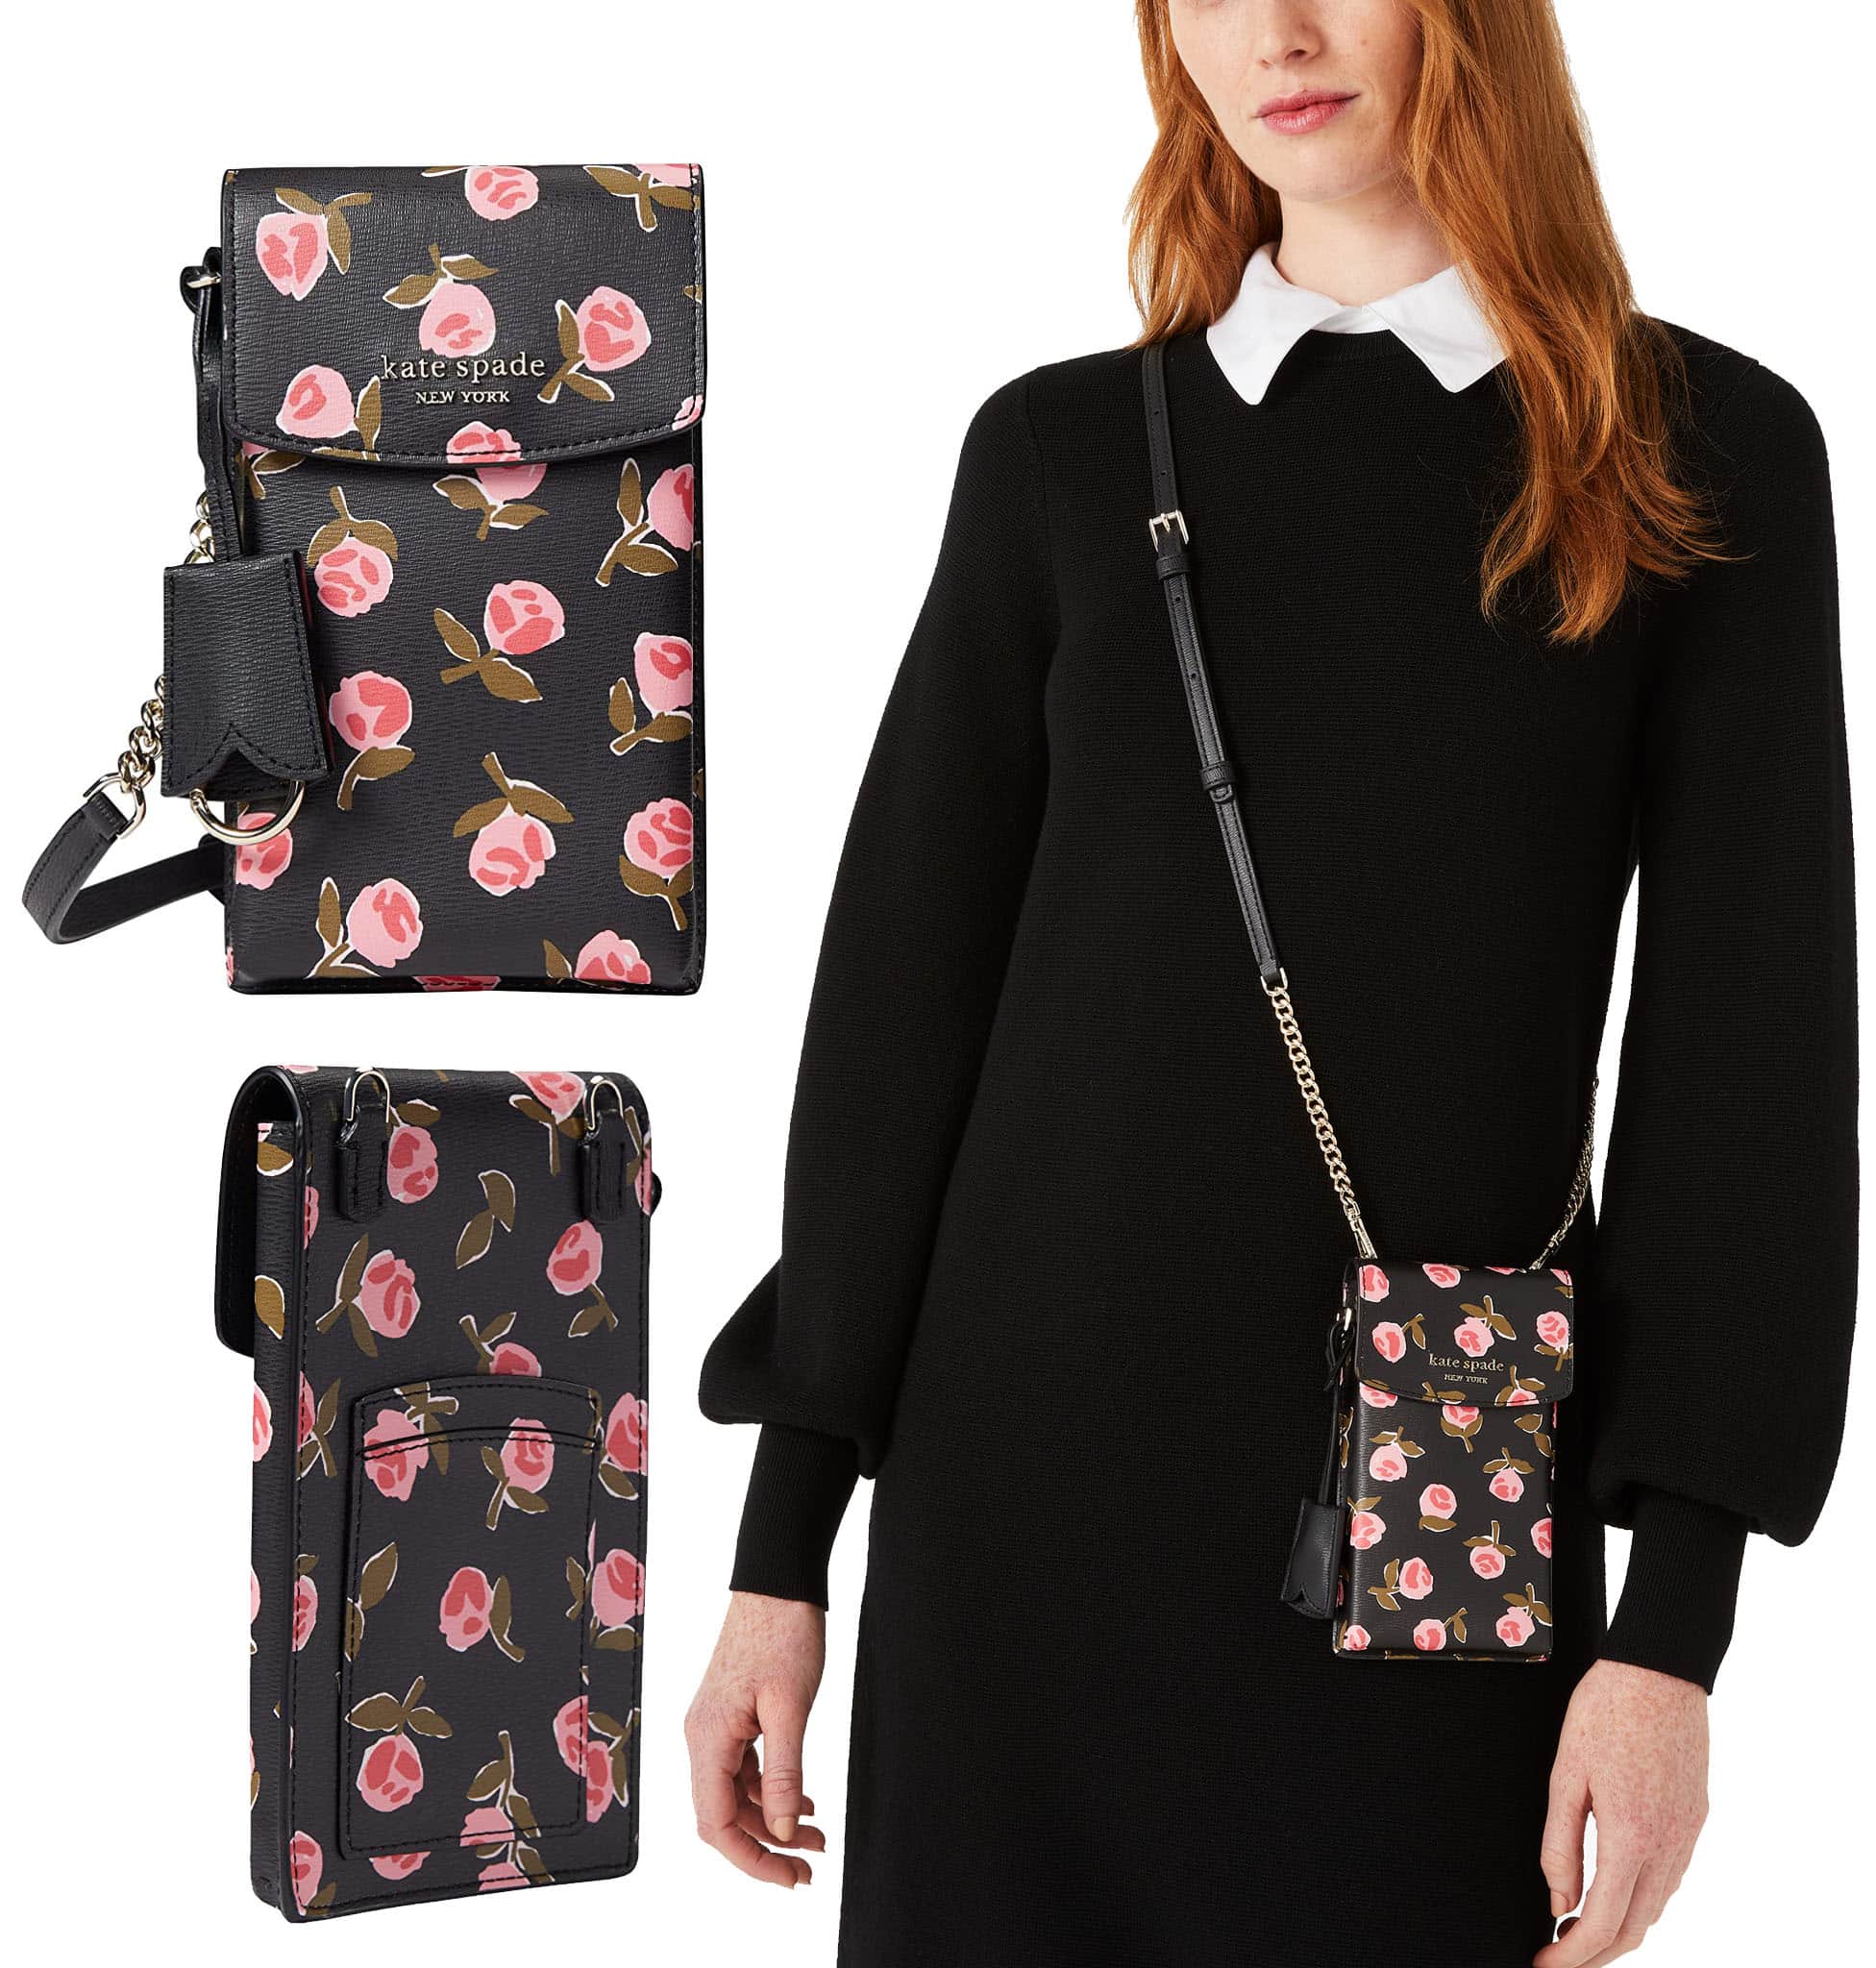 Made of printed PVC, this pretty Kate Spade Ditsy Rose crossbody features a magnetic flap, interior and exterior card slots, and a leather and chain strap